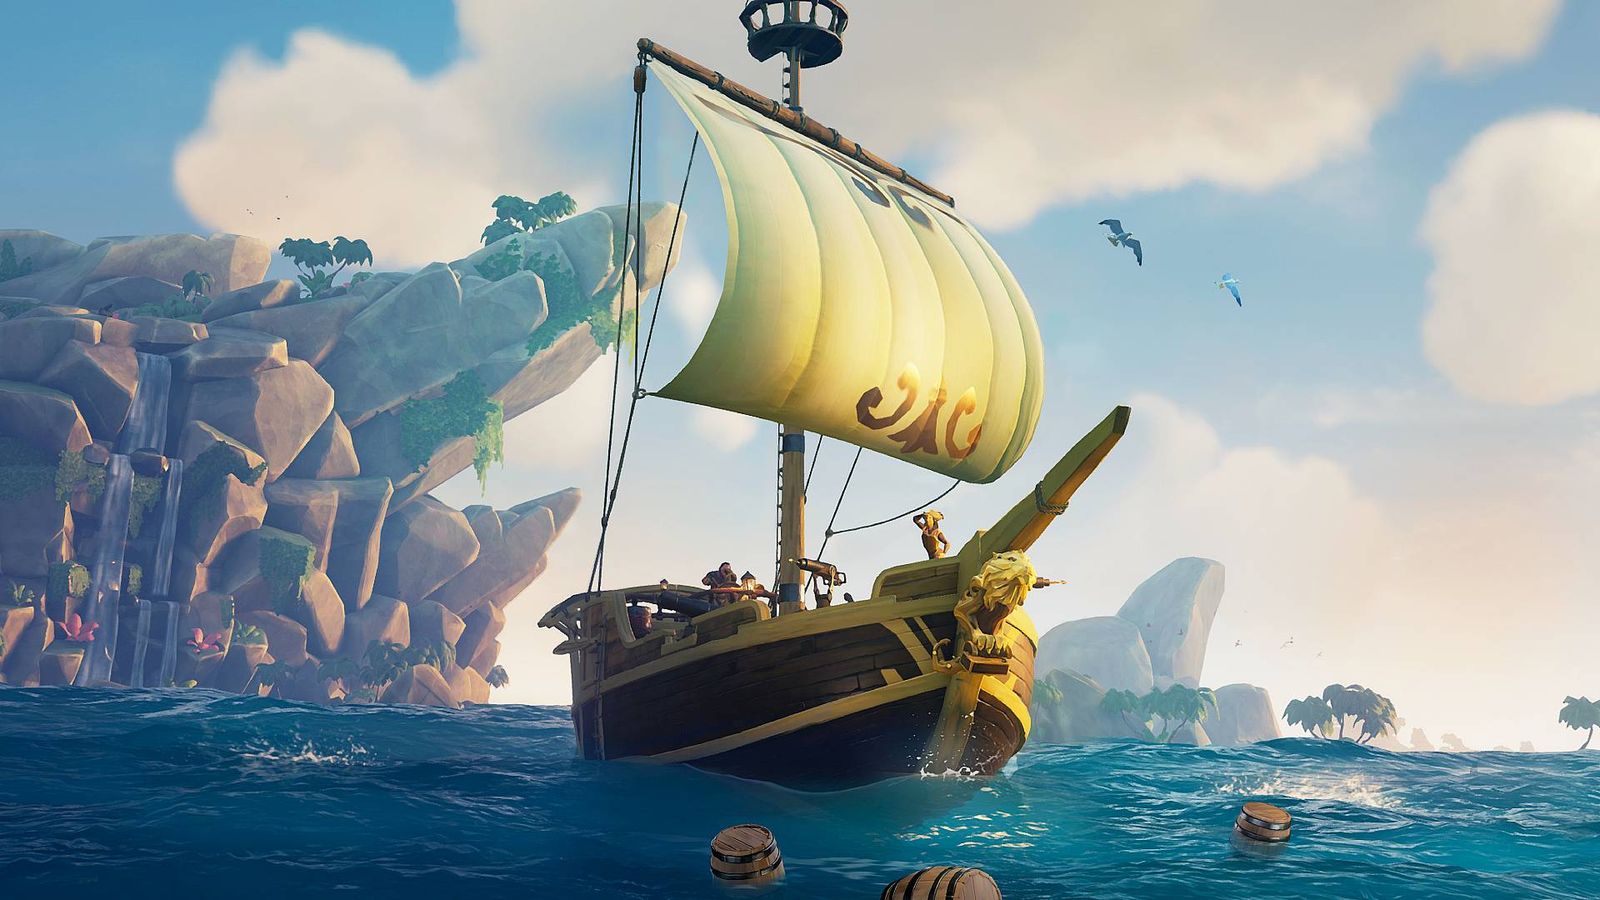 A Sloop in Sea of Thieves, a small ship with it's flag raised as it sails through the sea. There are three wooden barrels floating nearby.